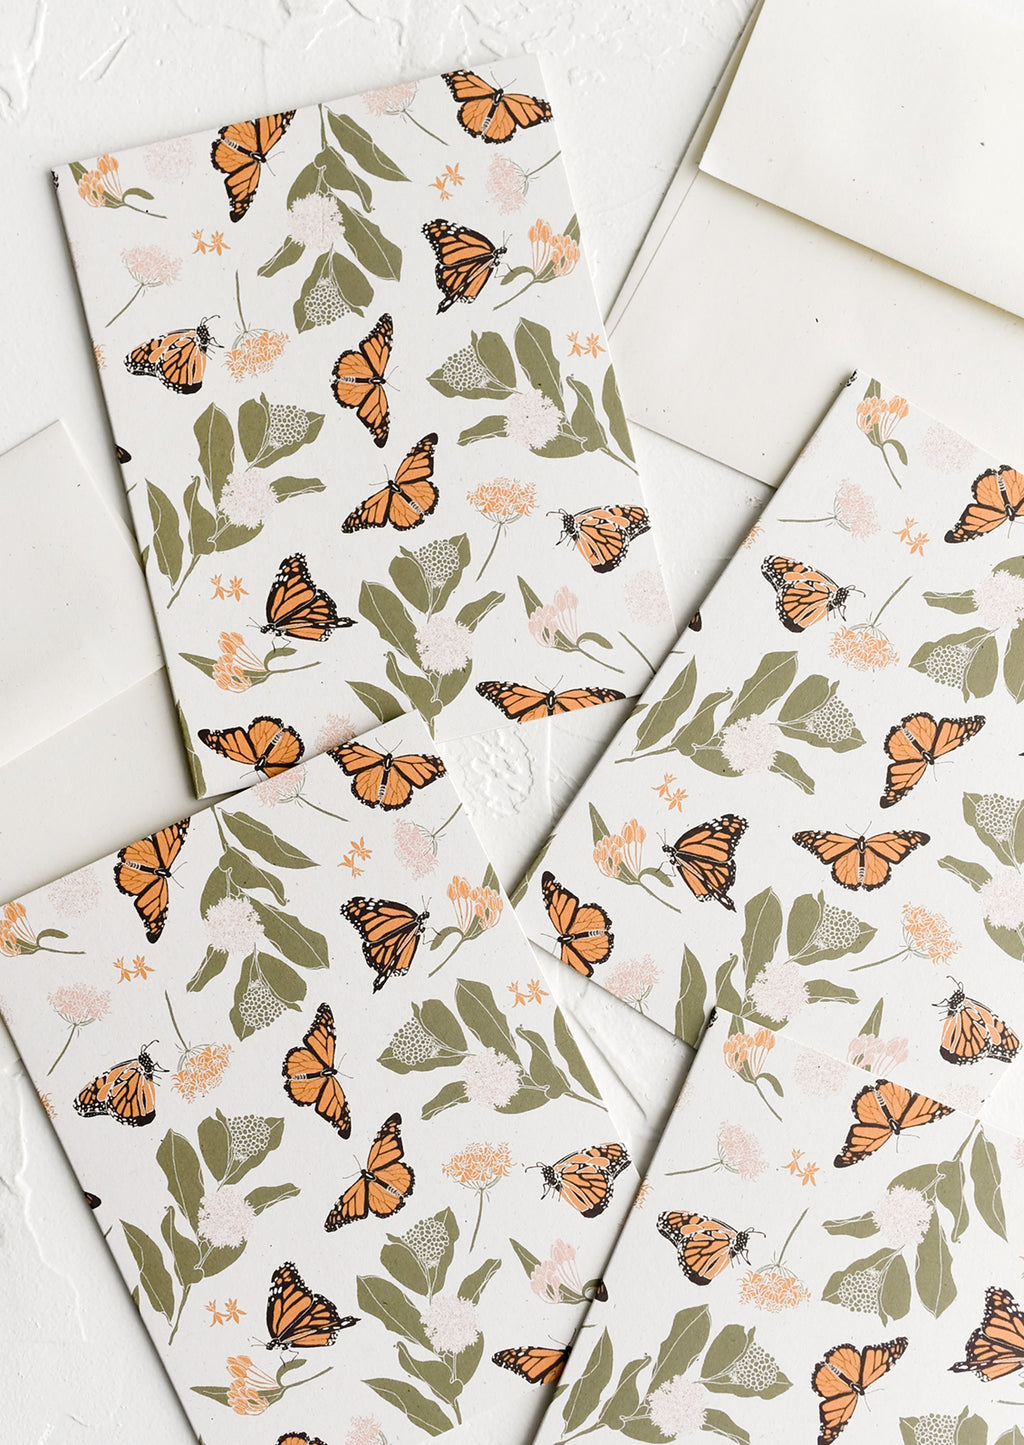 Boxed Set of 8: Greeting cards with monarch and milkweed print.